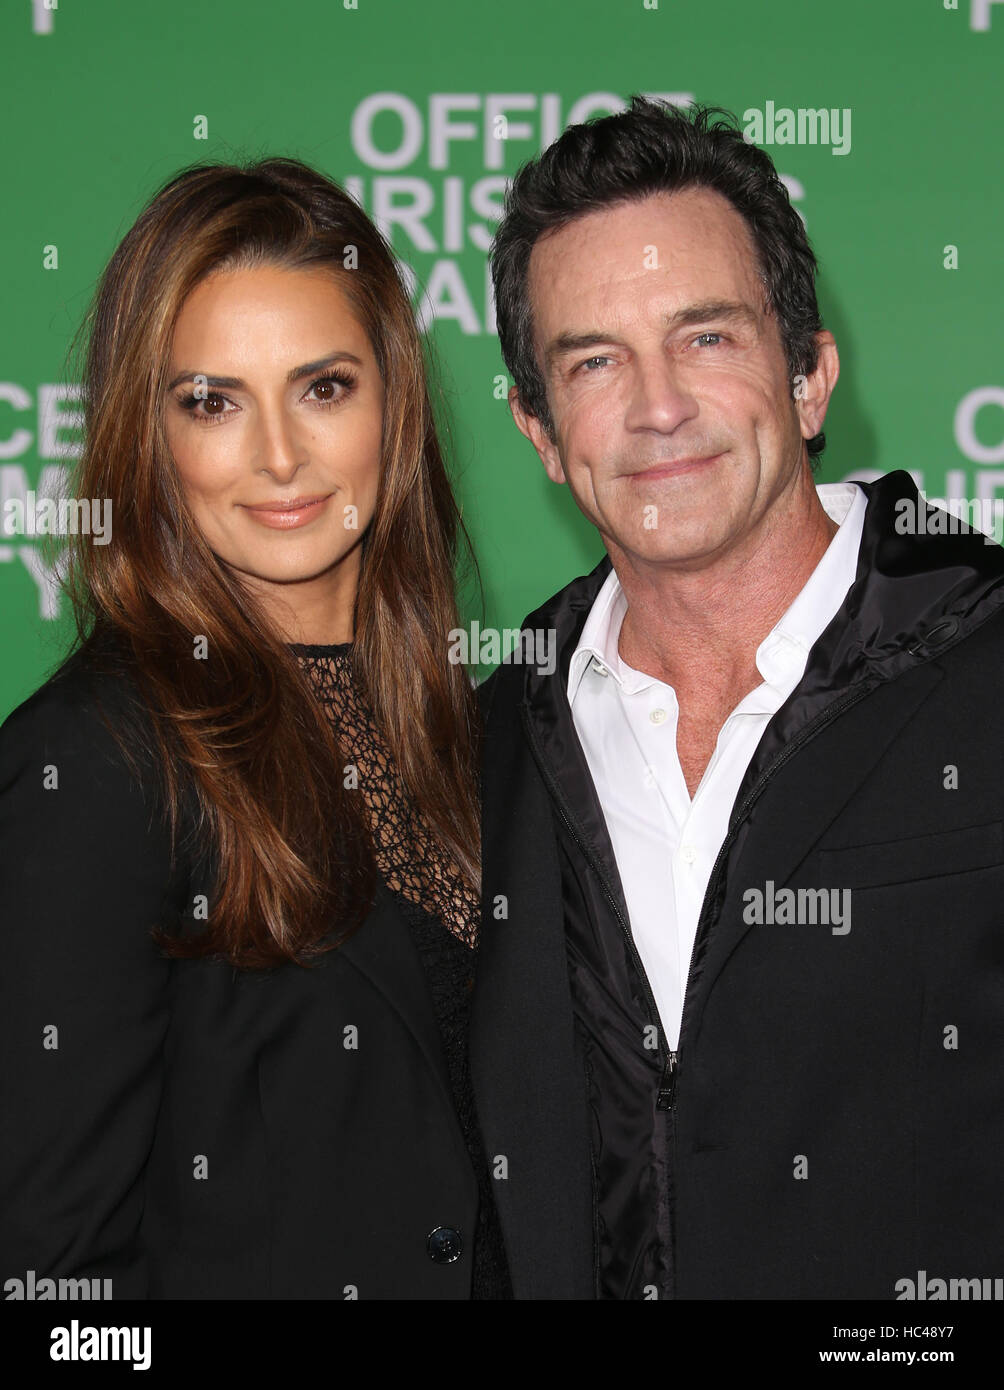 Westwood, CA. 07th Dec, 2016. Jeff Probst, Lisa Ann Russell, At Premiere Of Paramount Pictures' 'Office Christmas Party' At Regency Village Theatre, California on December 07, 2016. Credit:  Faye Sadou/Media Punch/Alamy Live News Stock Photo